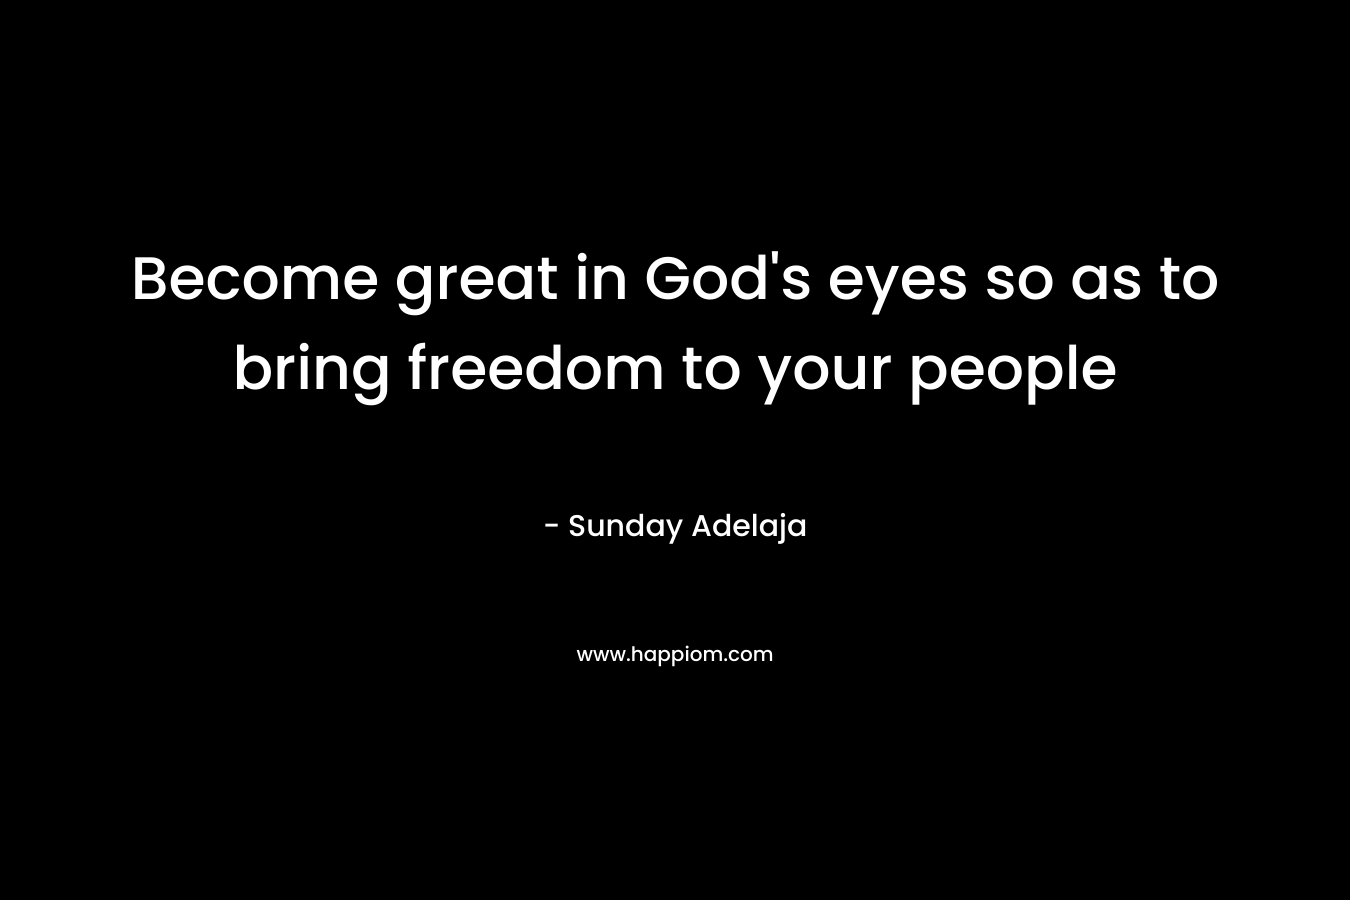 Become great in God's eyes so as to bring freedom to your people